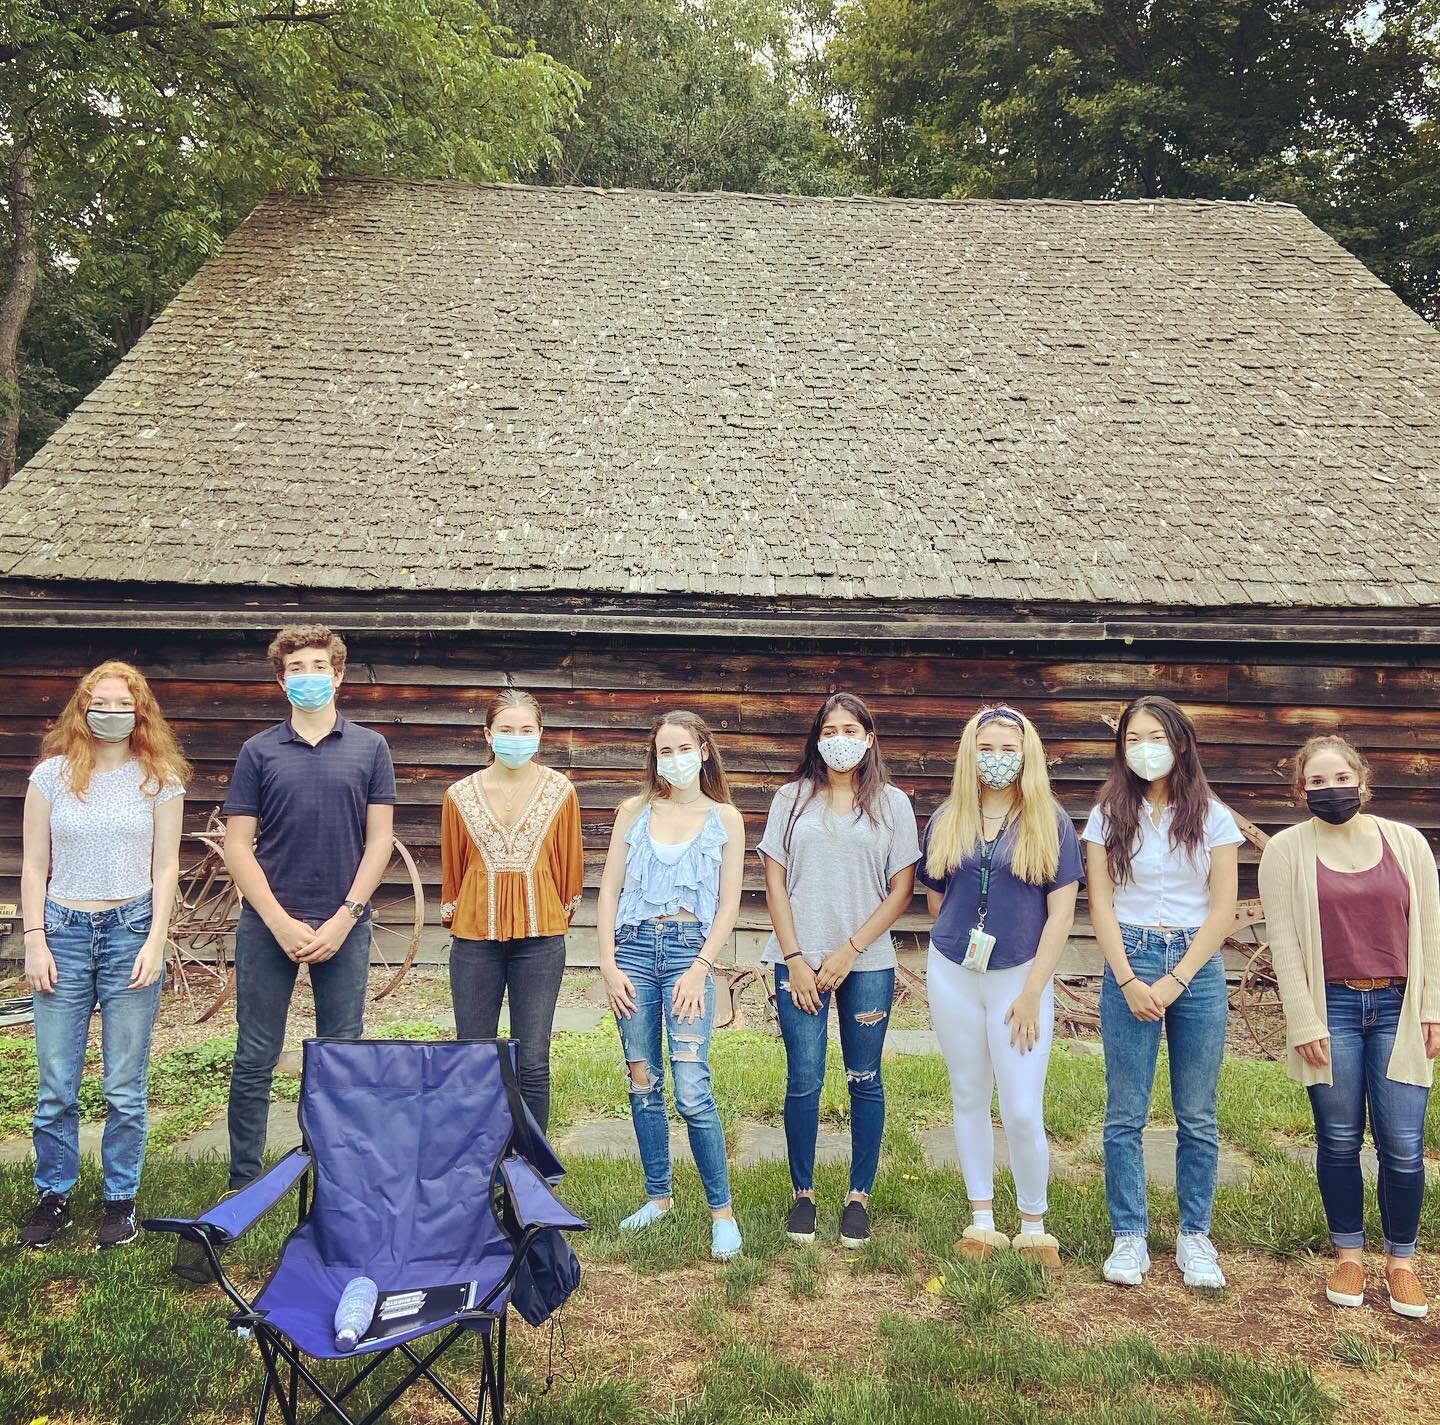 Congrats 🎊 and welcome 👋 to our new (and returning) class of USR Historical Society Junior Trustees!
.
.
.
#historylovers #historyinformsthefuture #hoppergoetschiushouse #uppersaddlerivernj #northernhighlands #historicalsociety #njhistory